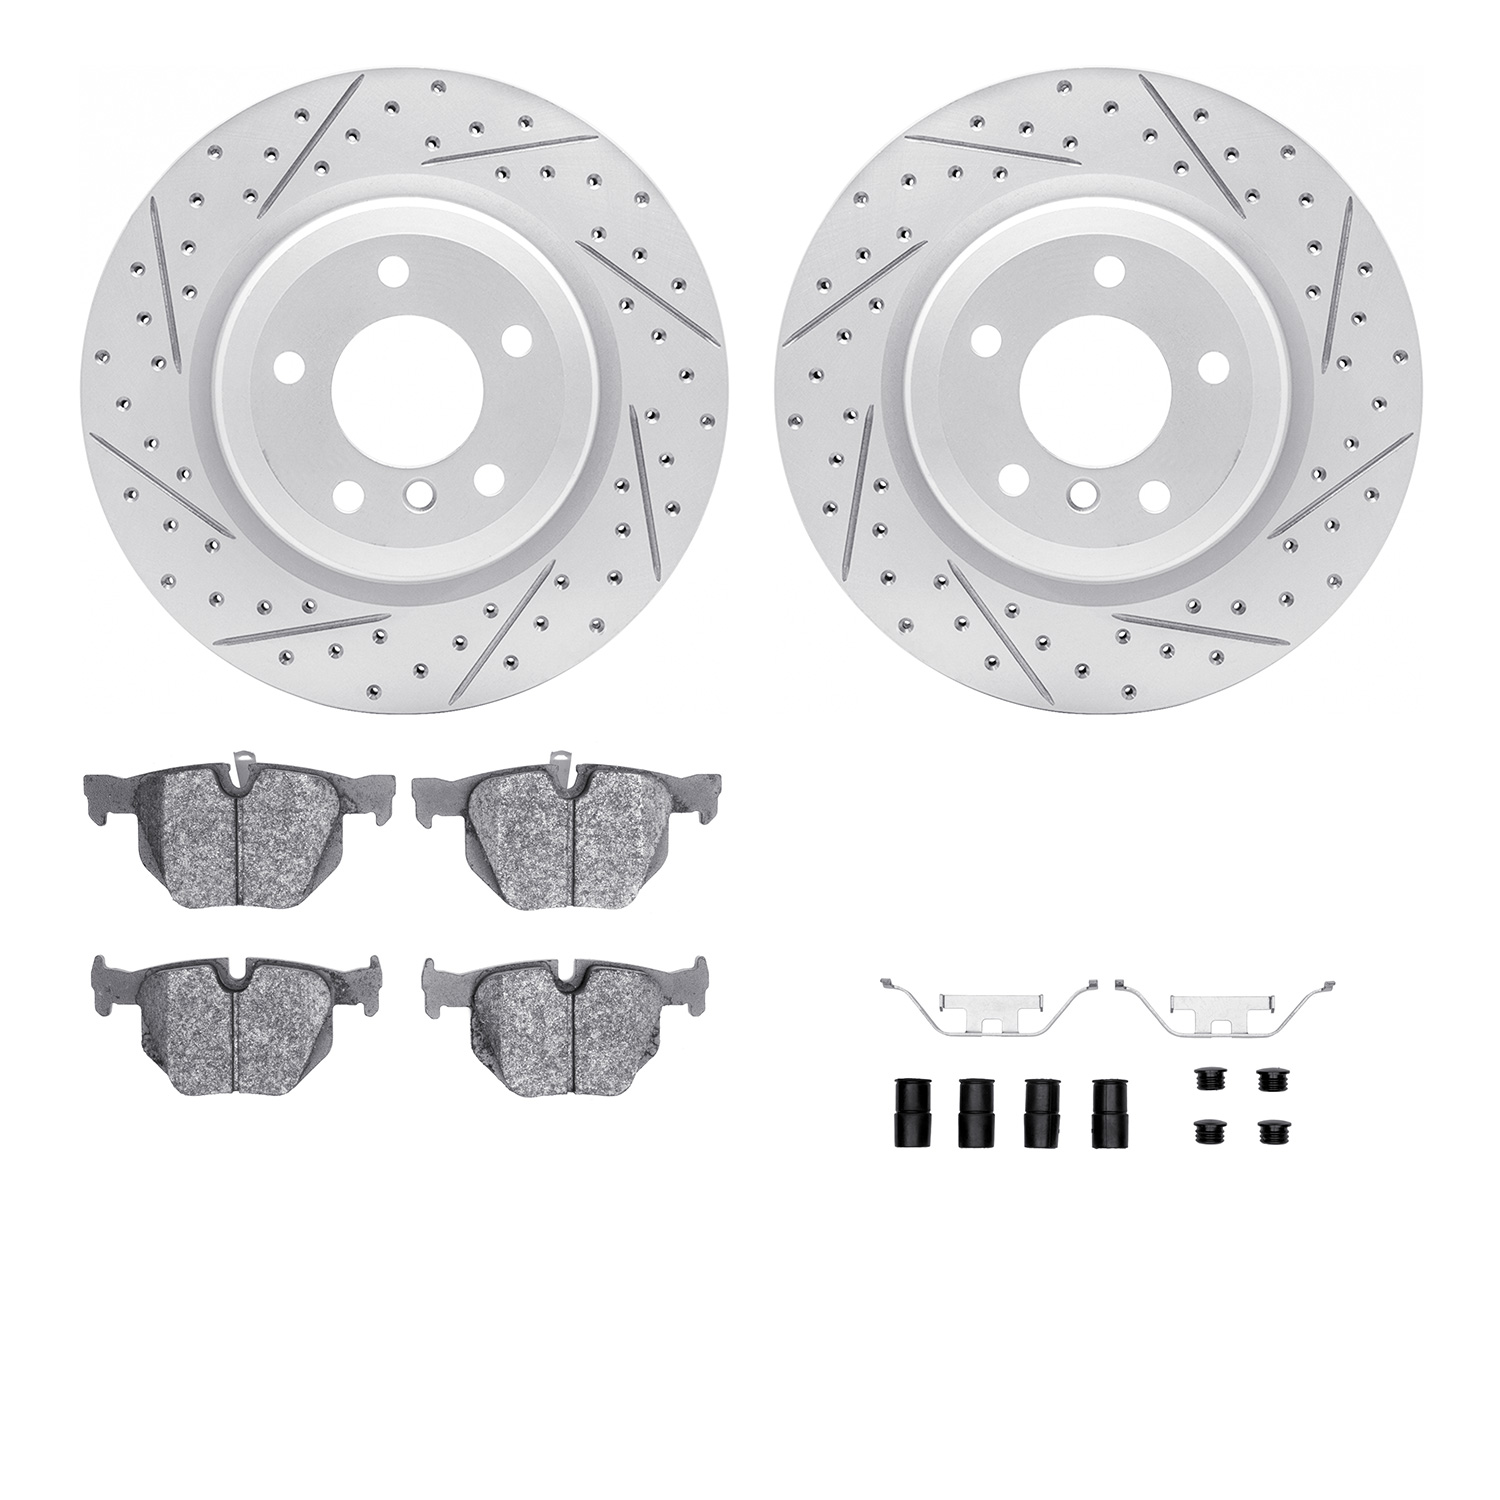 2512-31087 Geoperformance Drilled/Slotted Rotors w/5000 Advanced Brake Pads Kit & Hardware, 2006-2015 BMW, Position: Rear